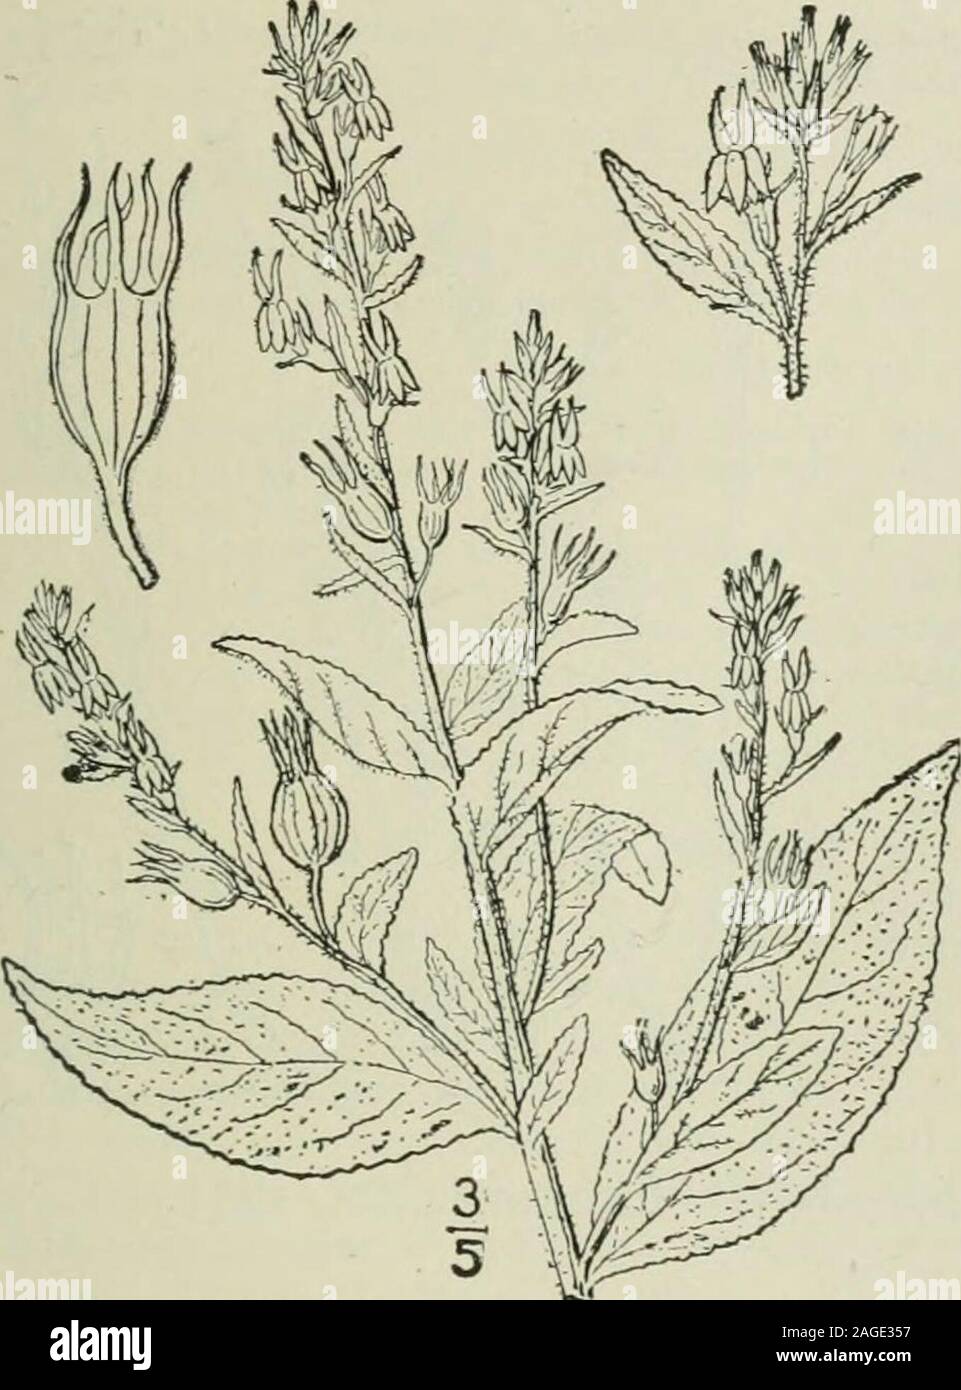 . An illustrated flora of the northern United States, Canada and the British possessions : from Newfoundland to the parallel of the southern boundary of Virginia and from the Atlantic Ocean westward to the 102nd meridian. Genus i. LOBELIA FAMILY. 10 Lobelia leptostachys A. DC. Spiked Lobelia. Fig. 4037. Lobelia leptostachys A. DC. Prodr. 7: 376. 1839. Similar to the preceding species; stem usuallystouter, puberulent or glabrous, 2°-4° high. Basalleaves oval or obovate, obtuse; stem leaves spatu-late, oblong, or lanceolate, obtuse, sometimesslightly scabrous, denticulate or entire, or theupperm Stock Photo